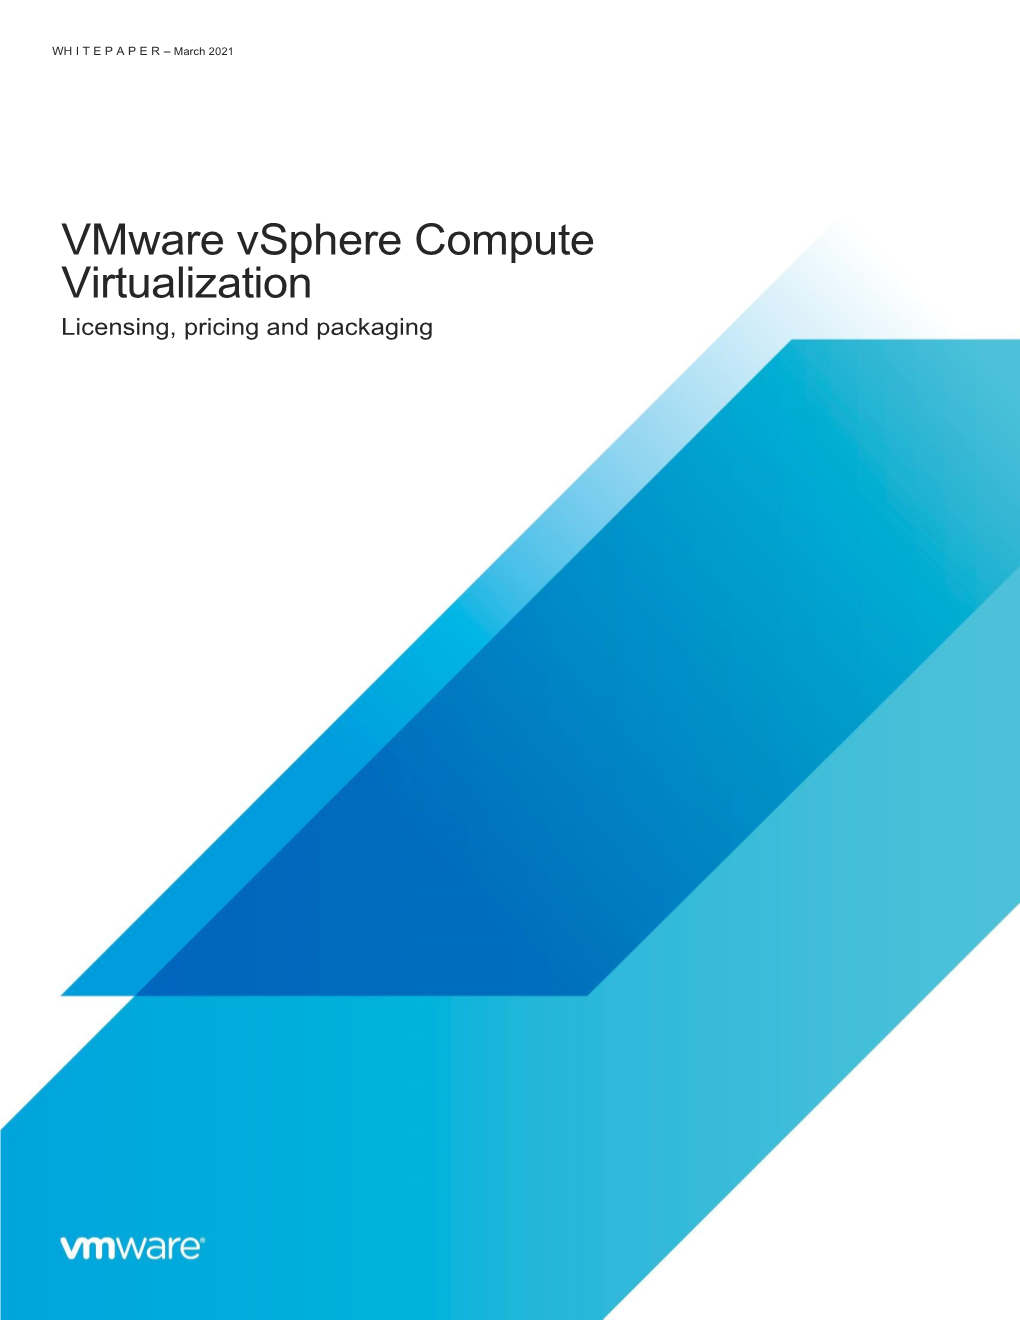 Vmware Vsphere Compute Virtualization Licensing, Pricing and Packaging